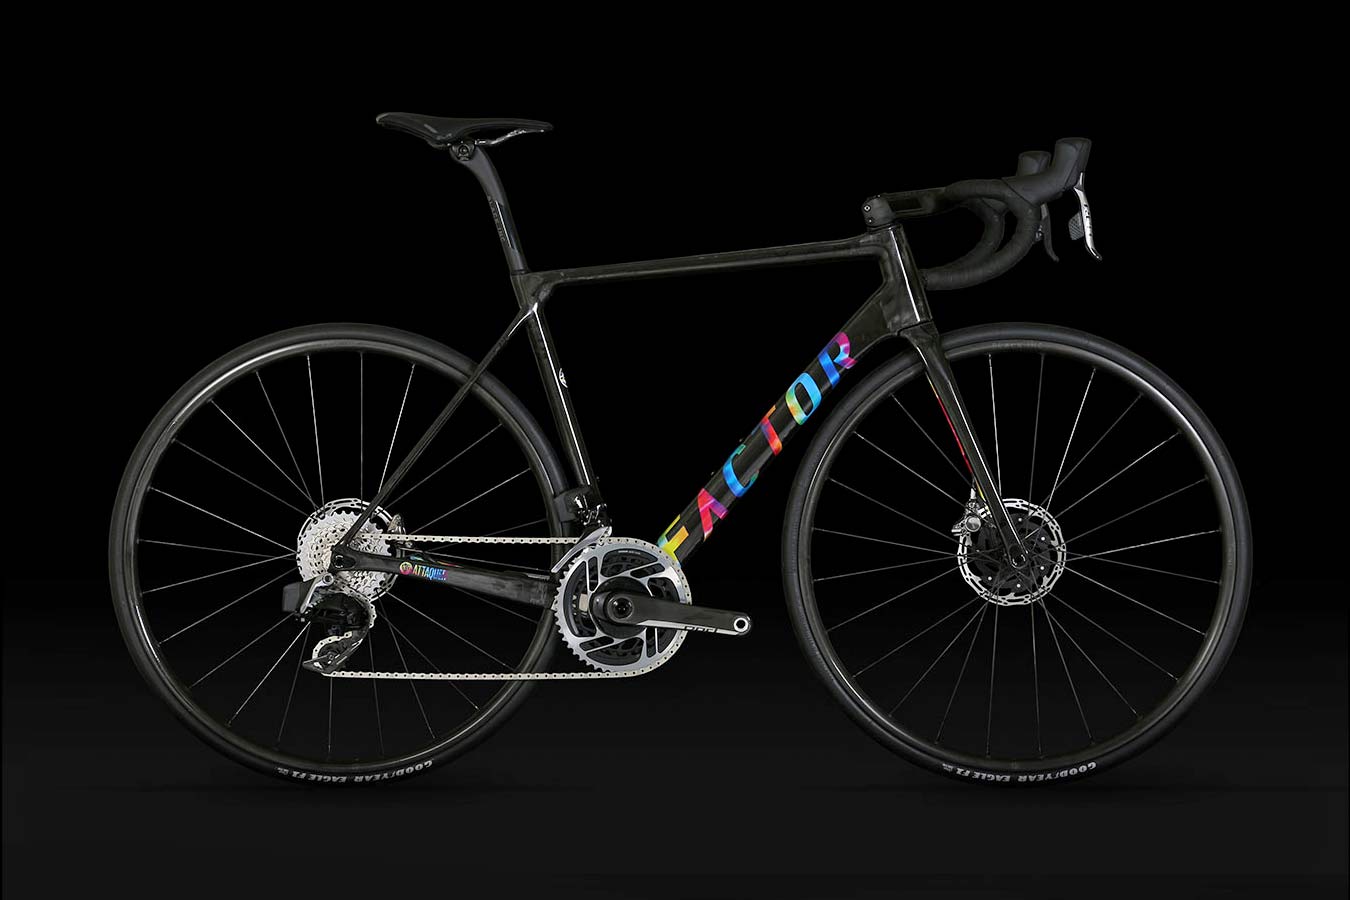 Factor O2 VAM is an ultralight carbon climber's road bike that weighs just 677g, complete Attaquer limited edition build